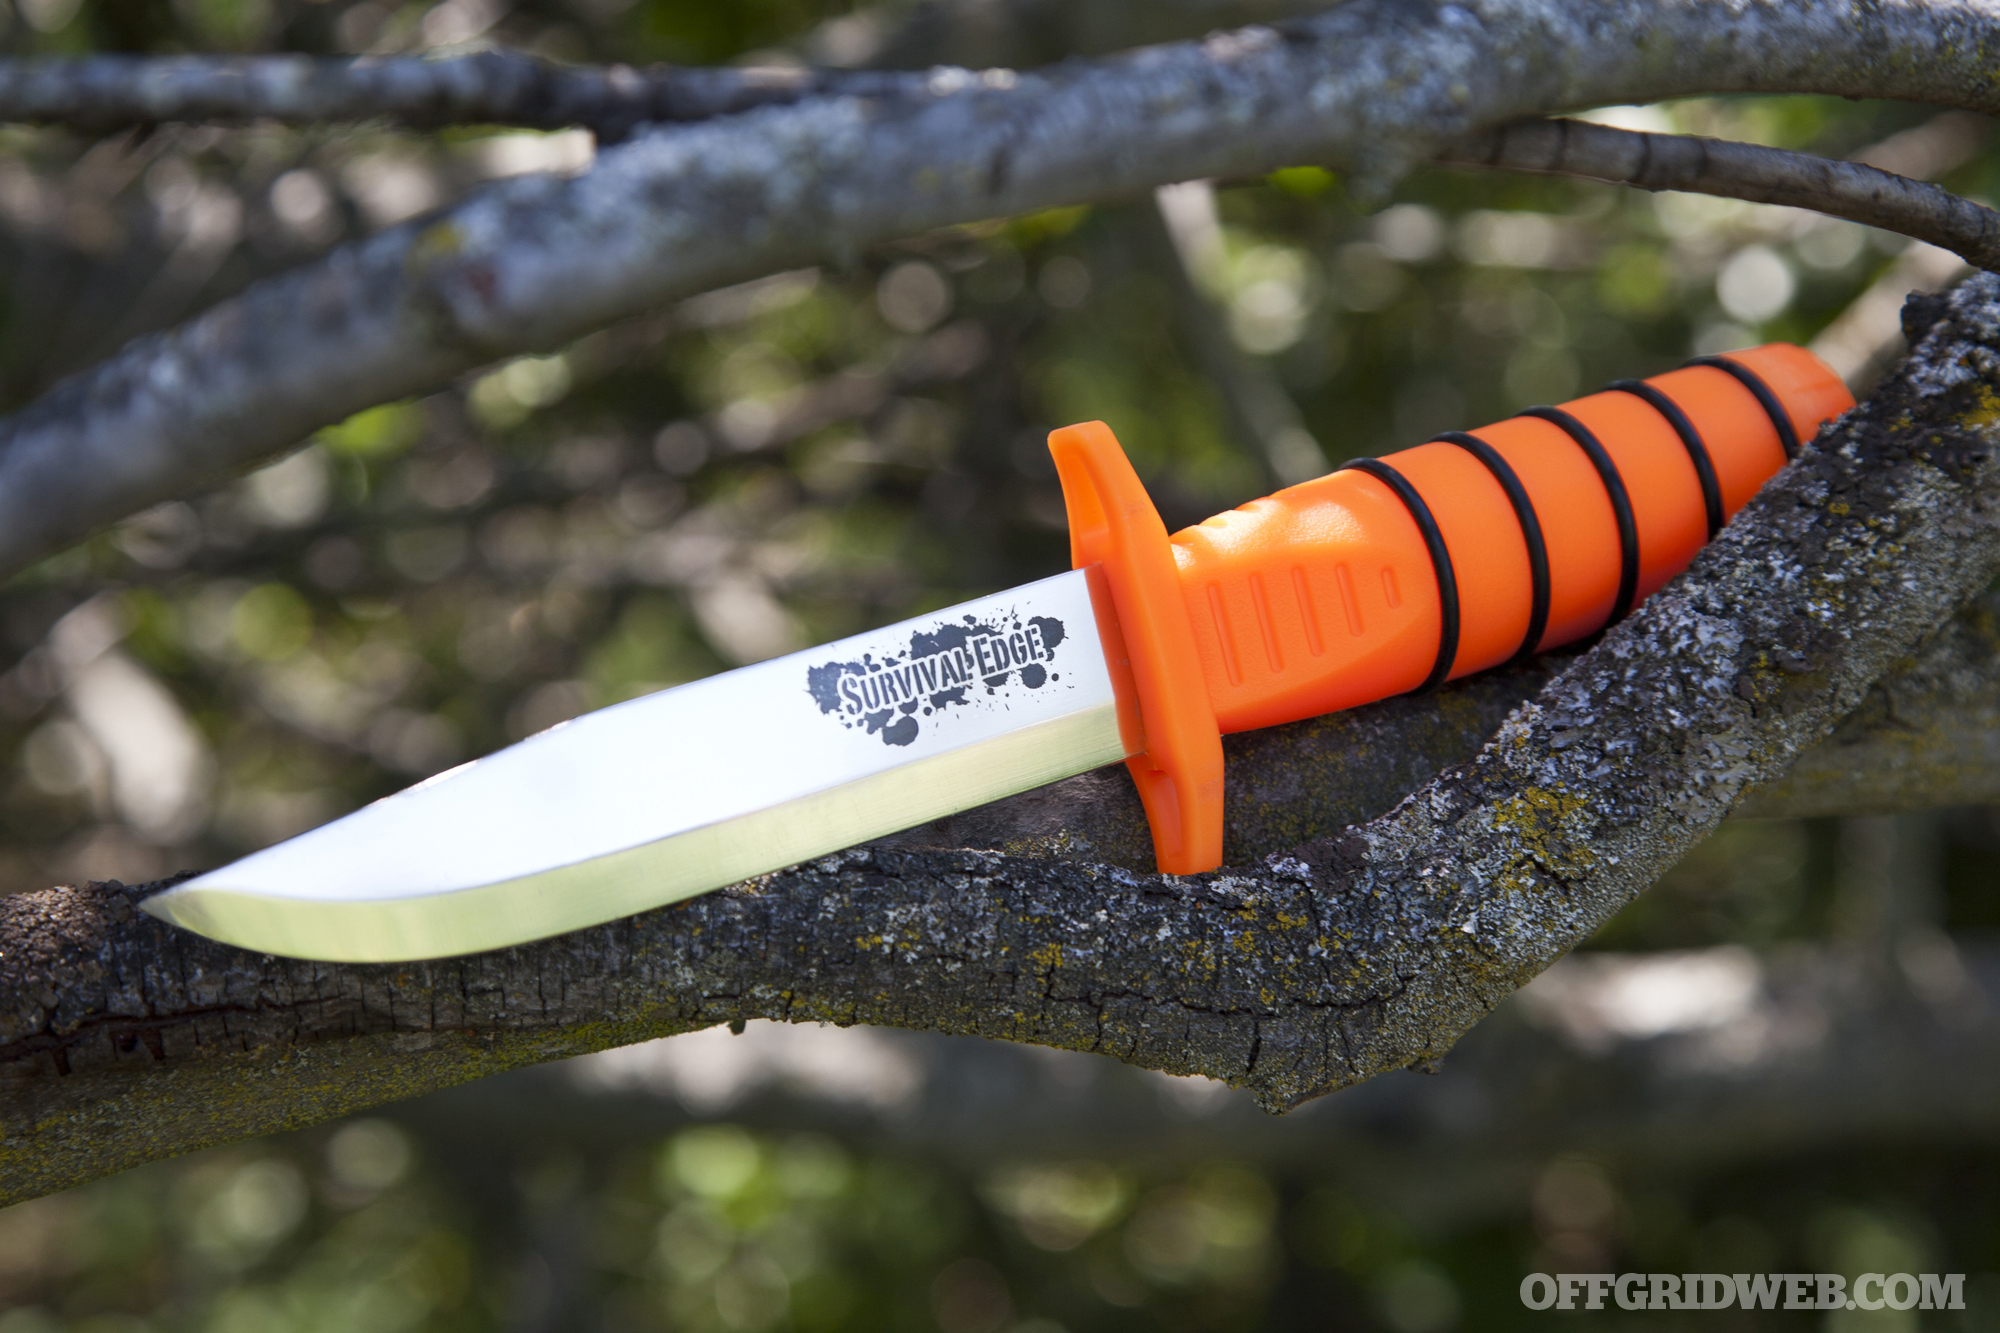 https://offgridweb.com/wp-content/uploads/2016/05/Cold-Steel-Survival-Edge-knife-review-15.jpg